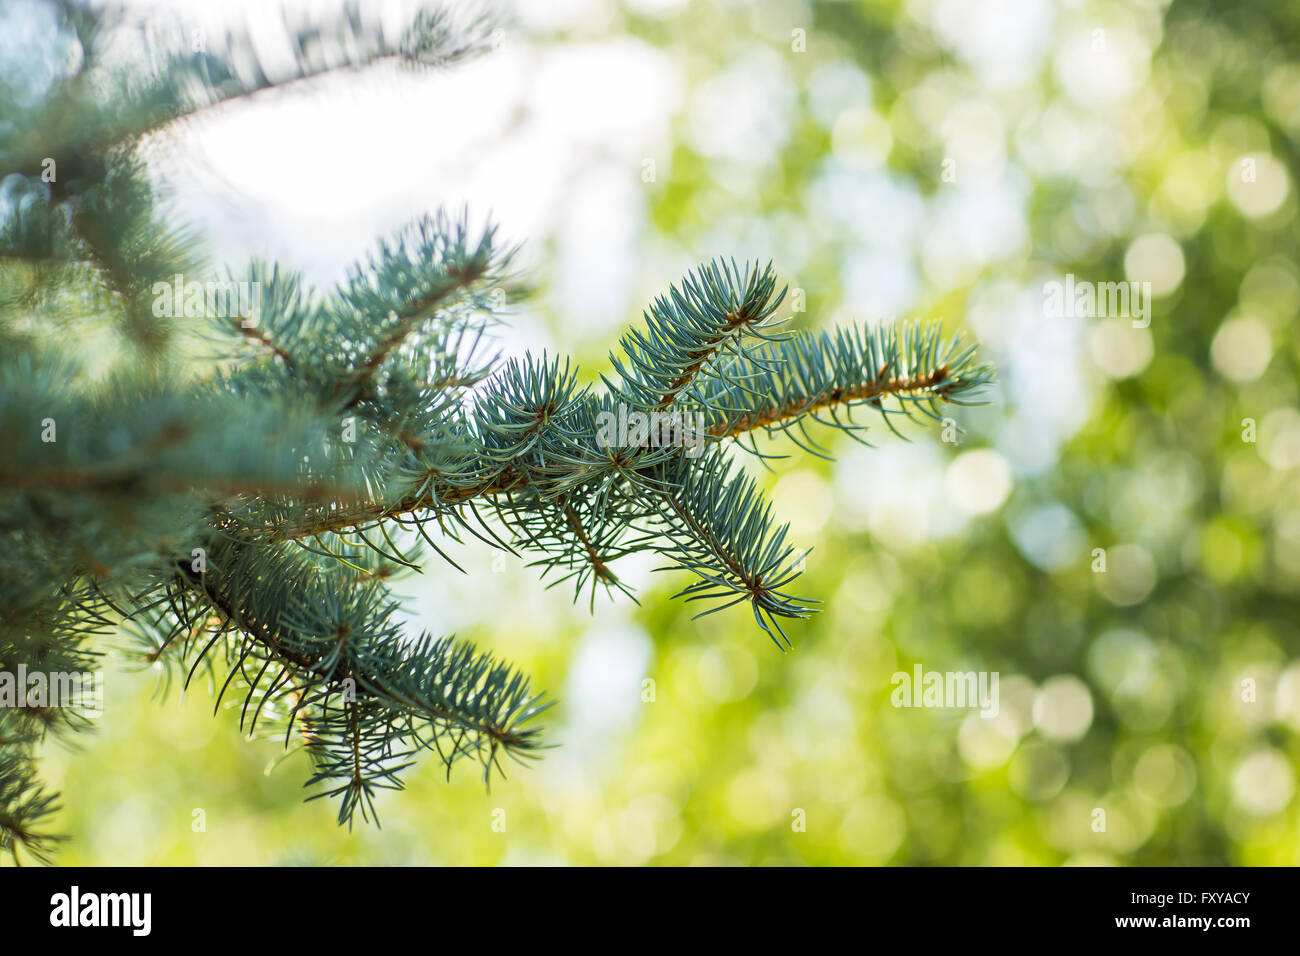 Blue spruce branches outdoors on a green background Stock Photo